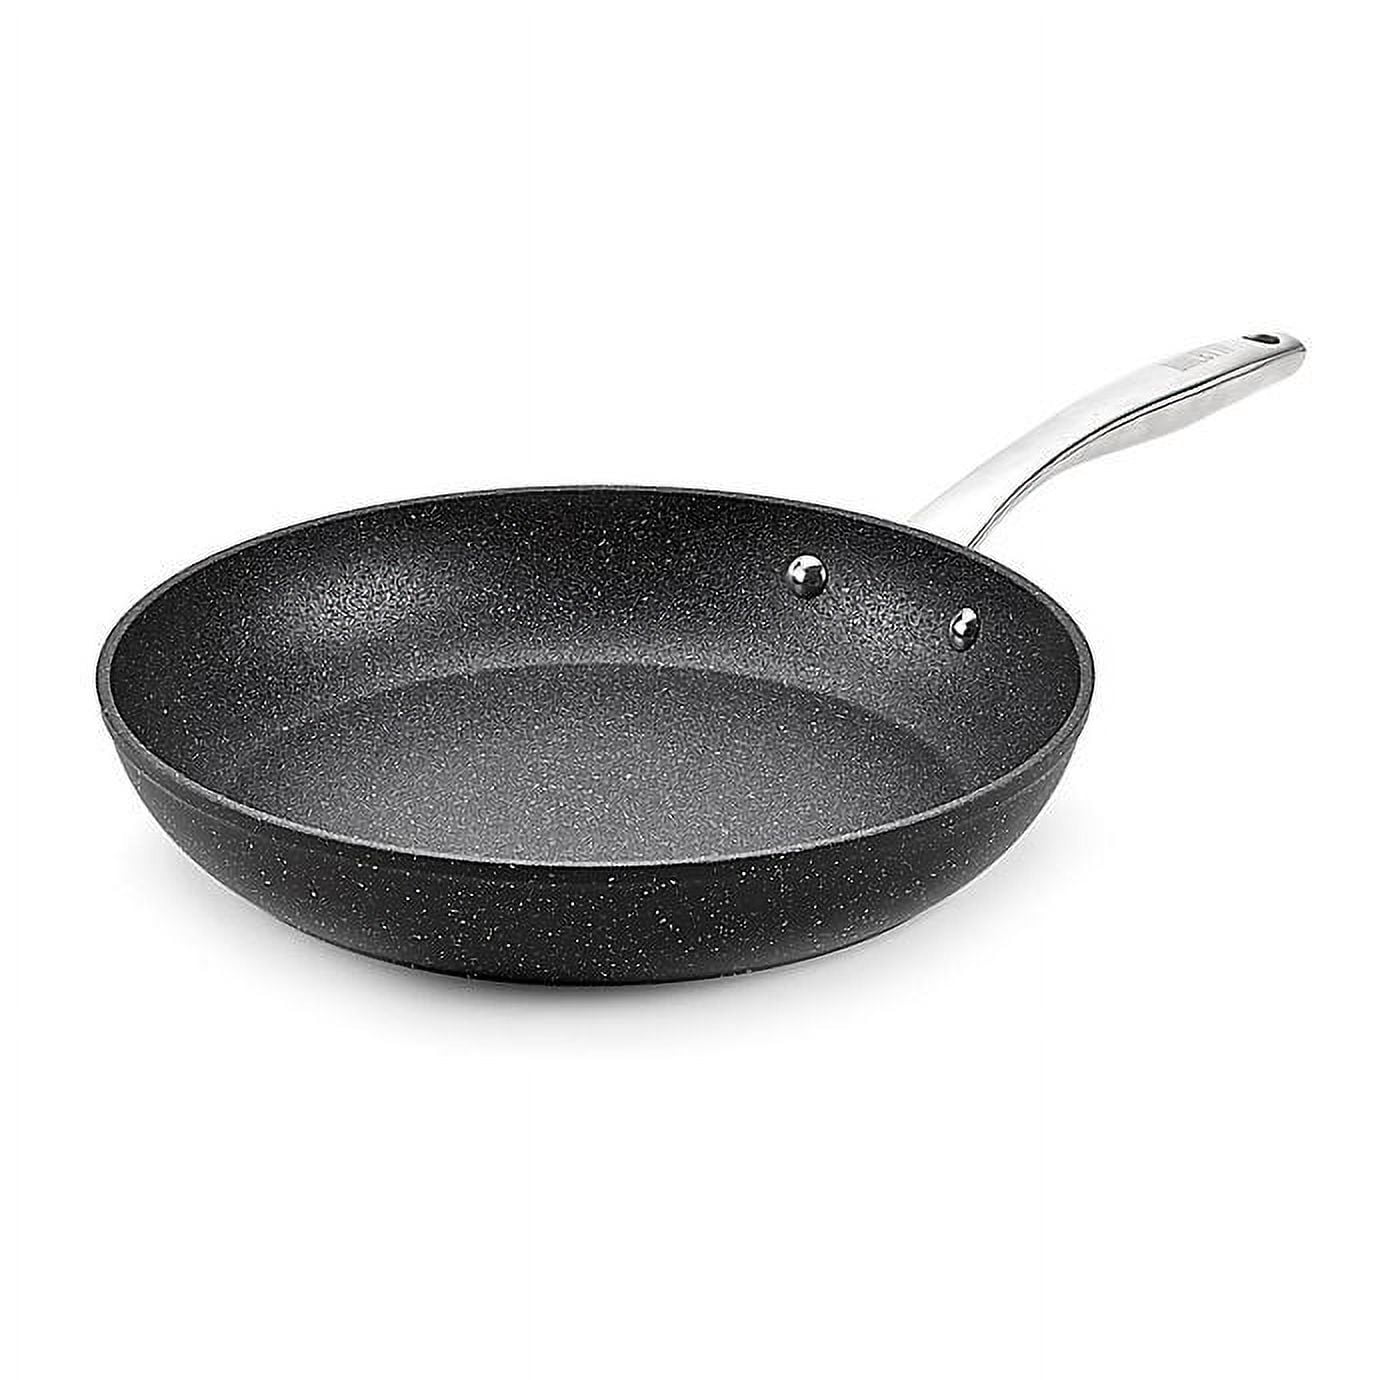 Met Lux Round Black Carbon Steel 8 inch Fry Pan - Non-Stick - 1 Count Box